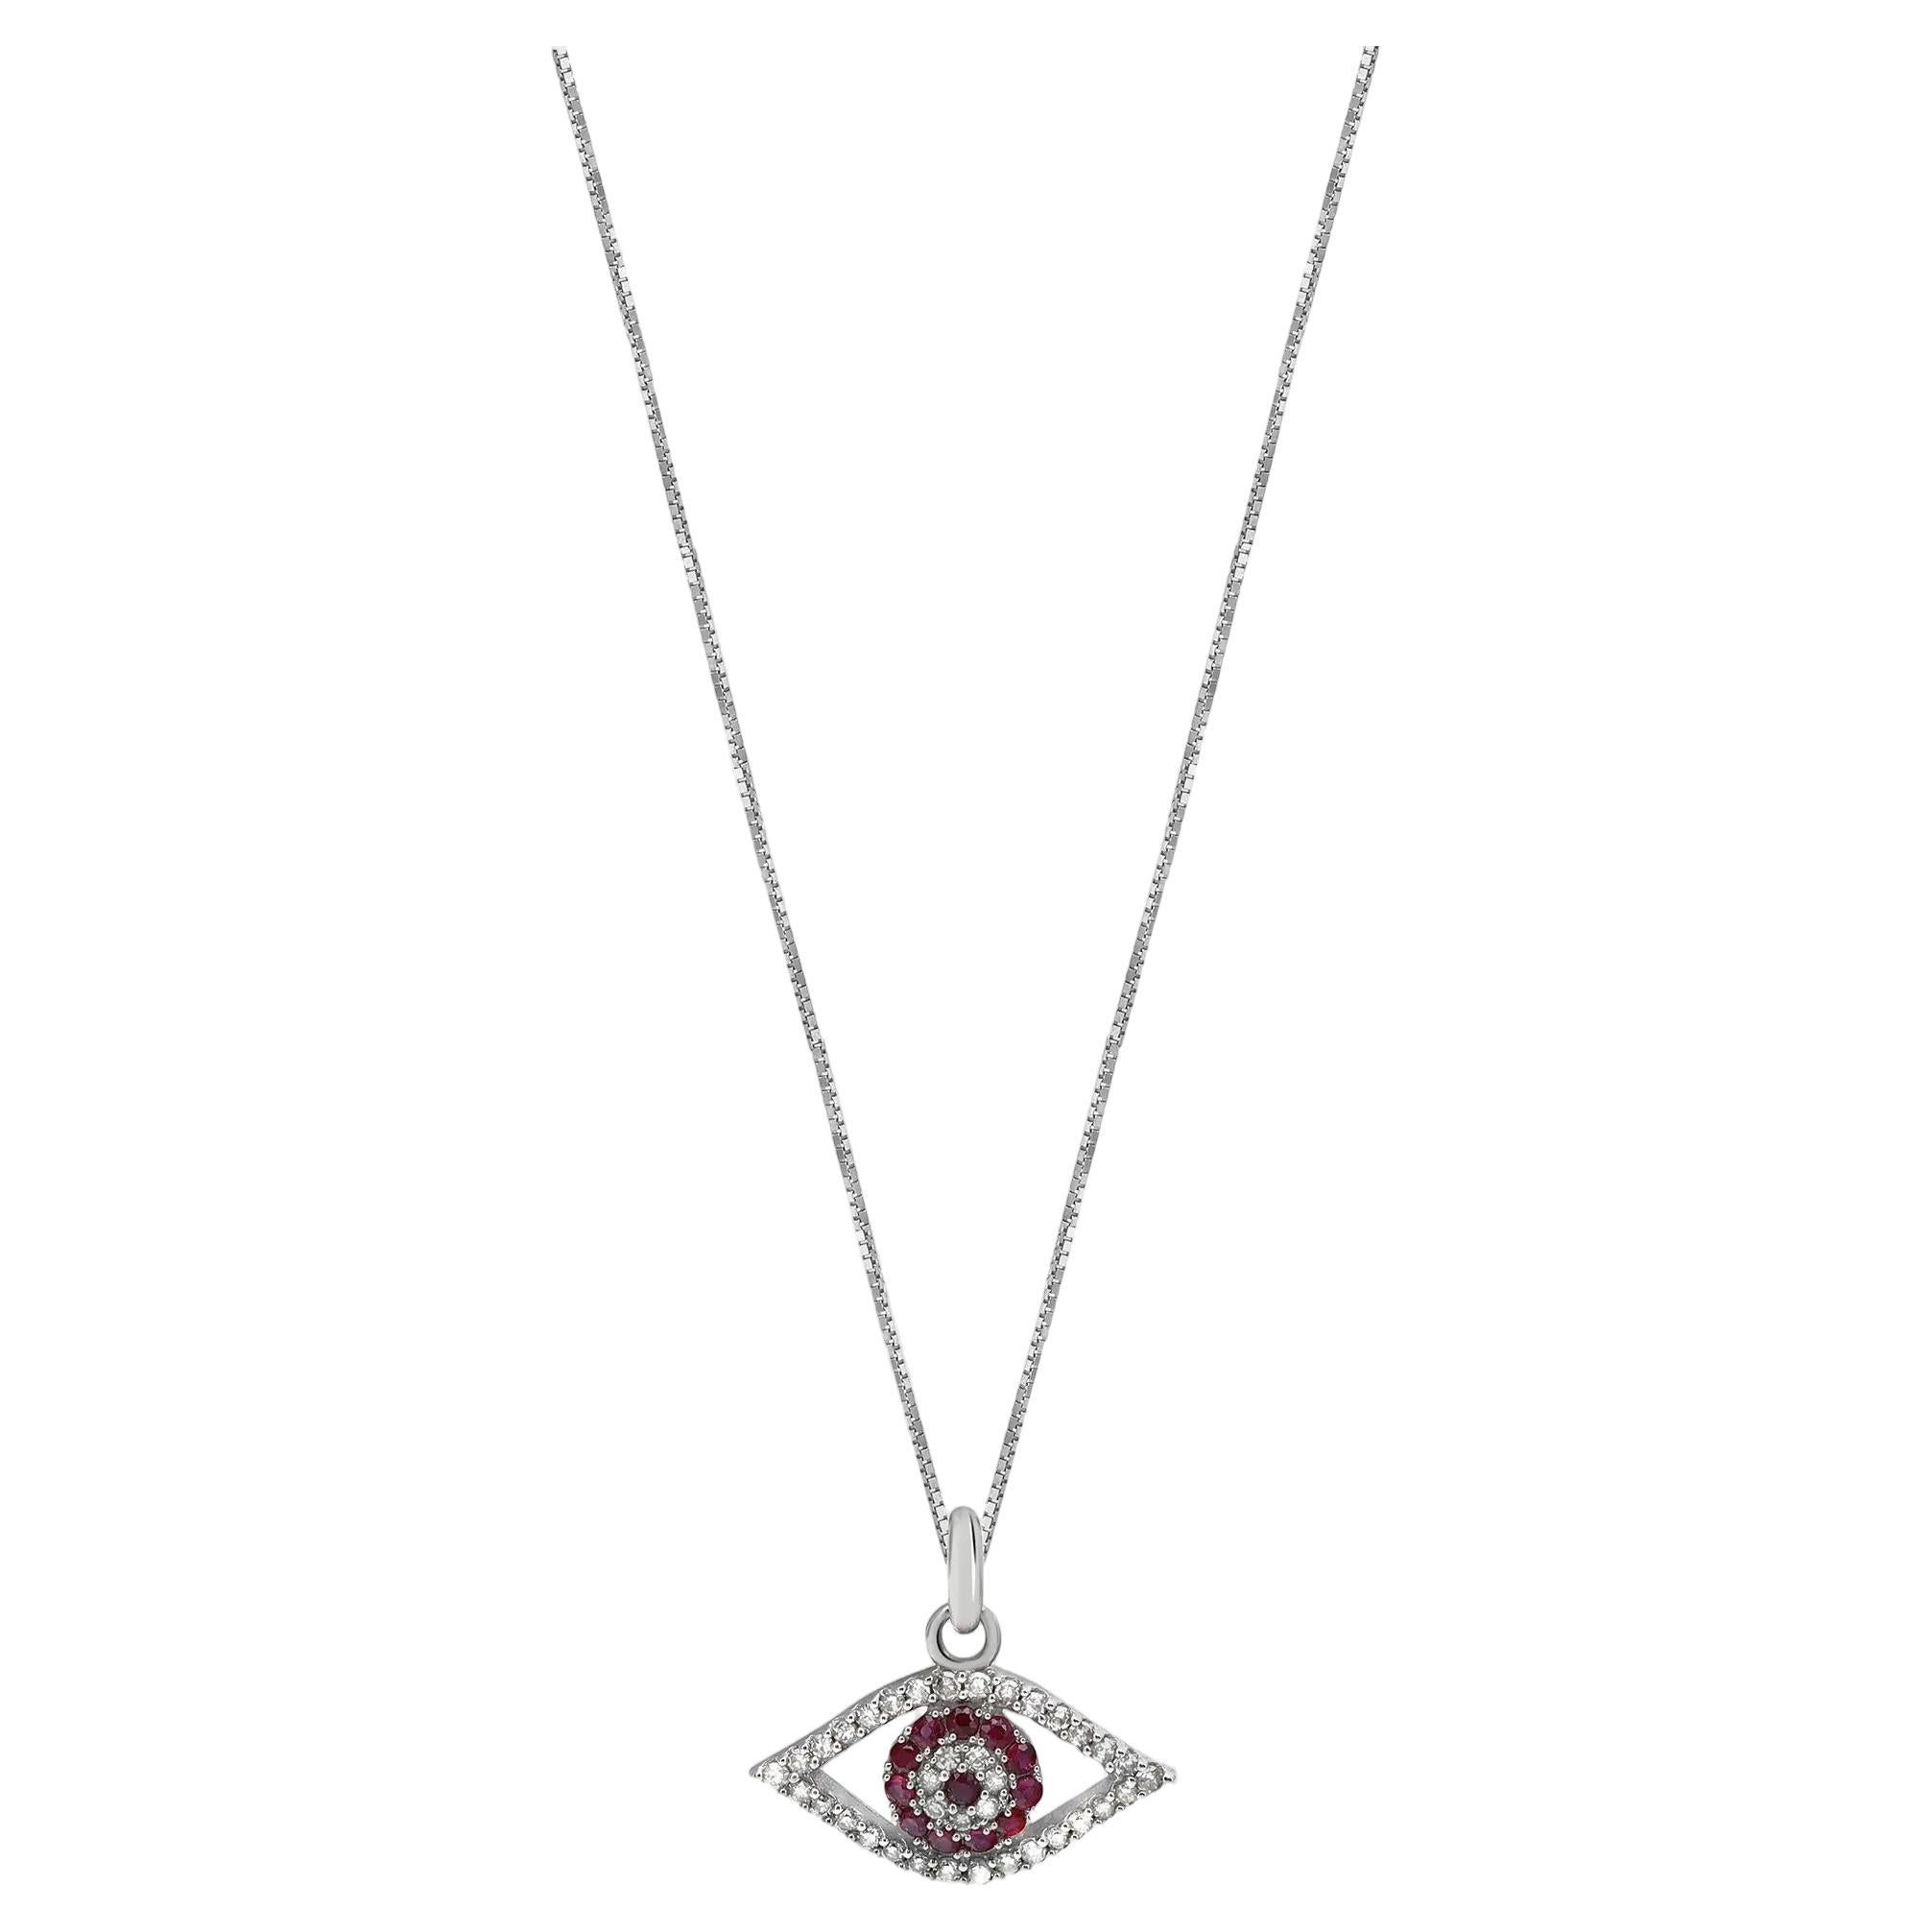 Evil Eye Ruby And Diamond Pendant Necklace In 14K White Gold 18 Inches